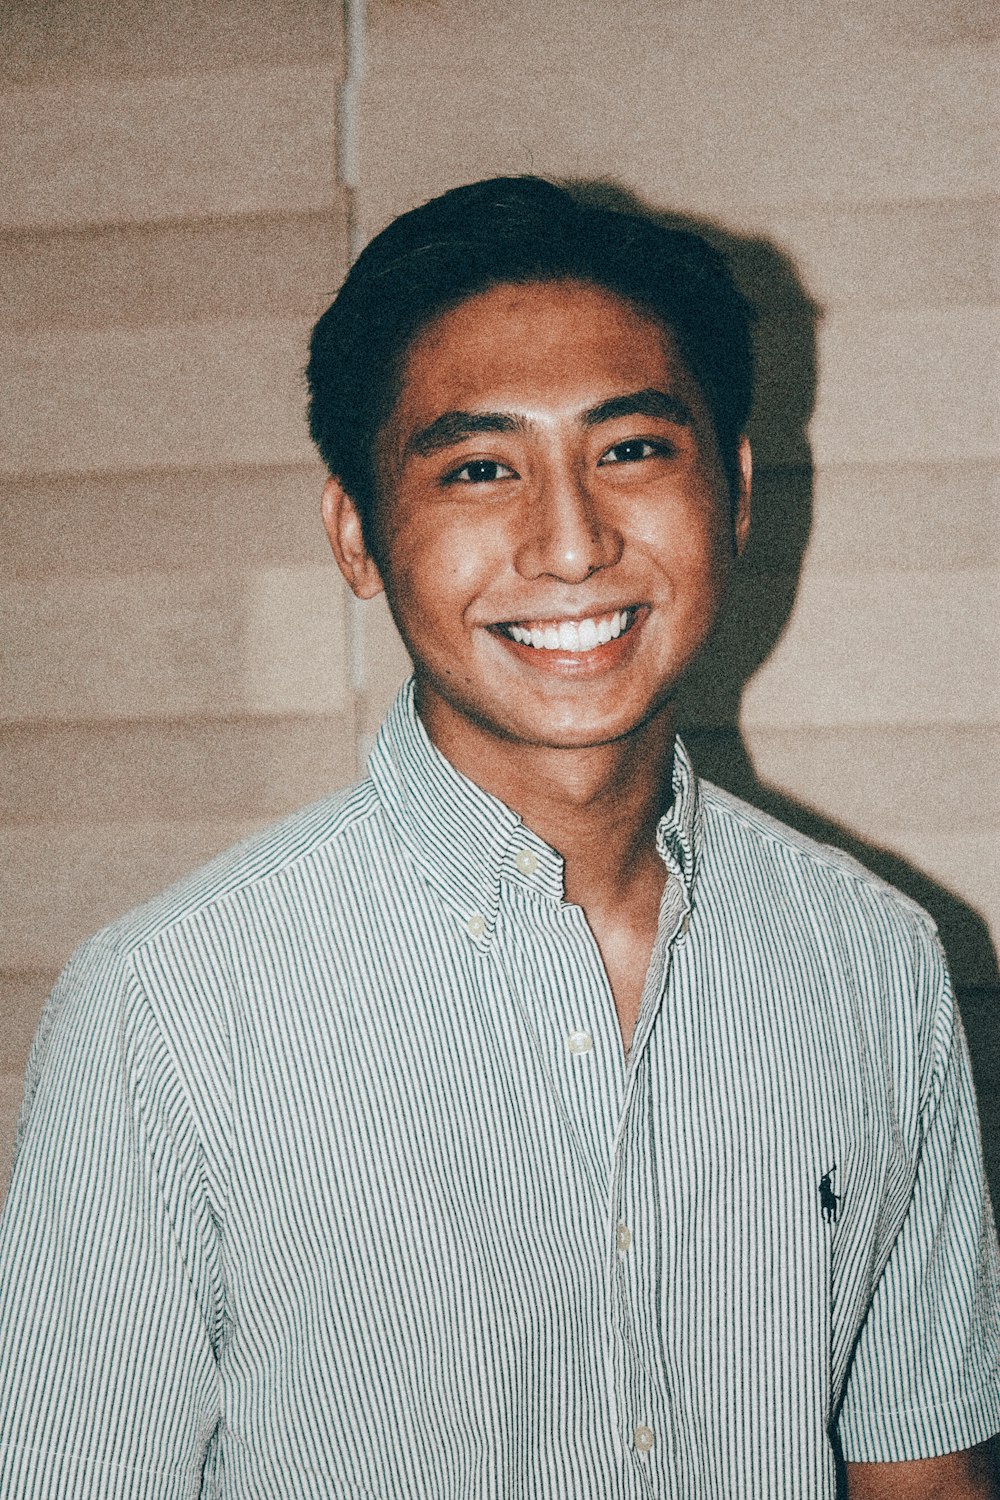 a man in a blue and white shirt smiles at the camera